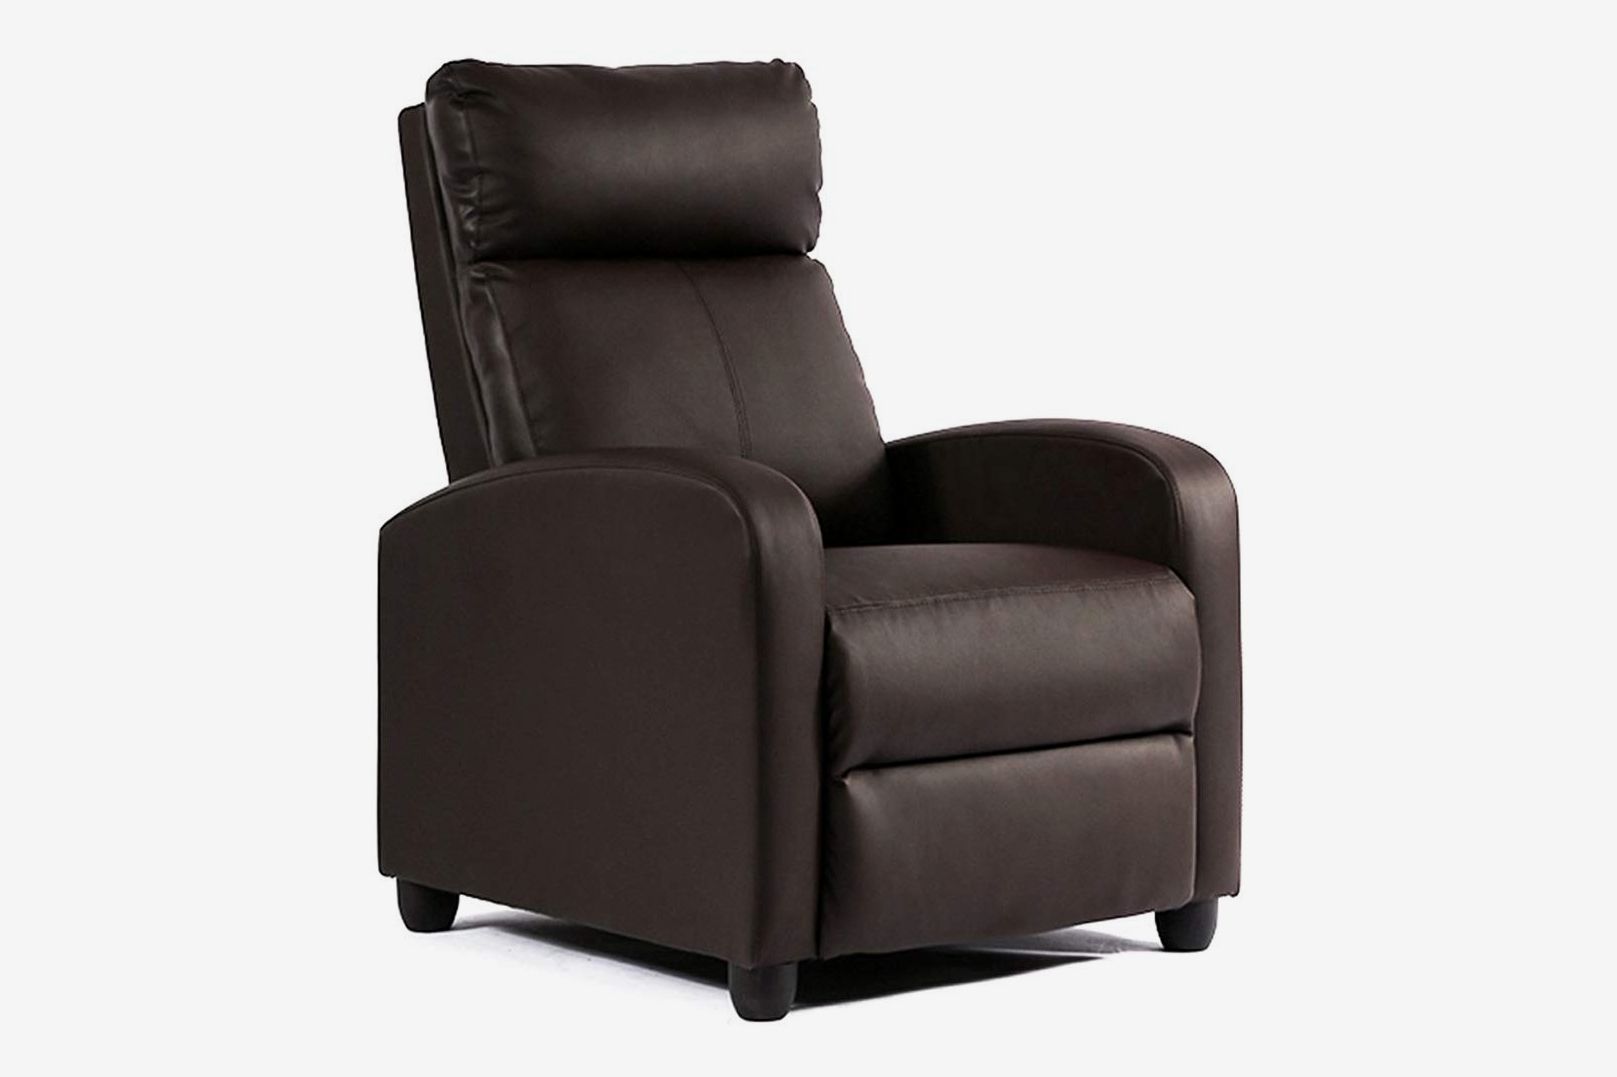 5 Best Leather Recliners 2019 The, Leather Chairs Recliner